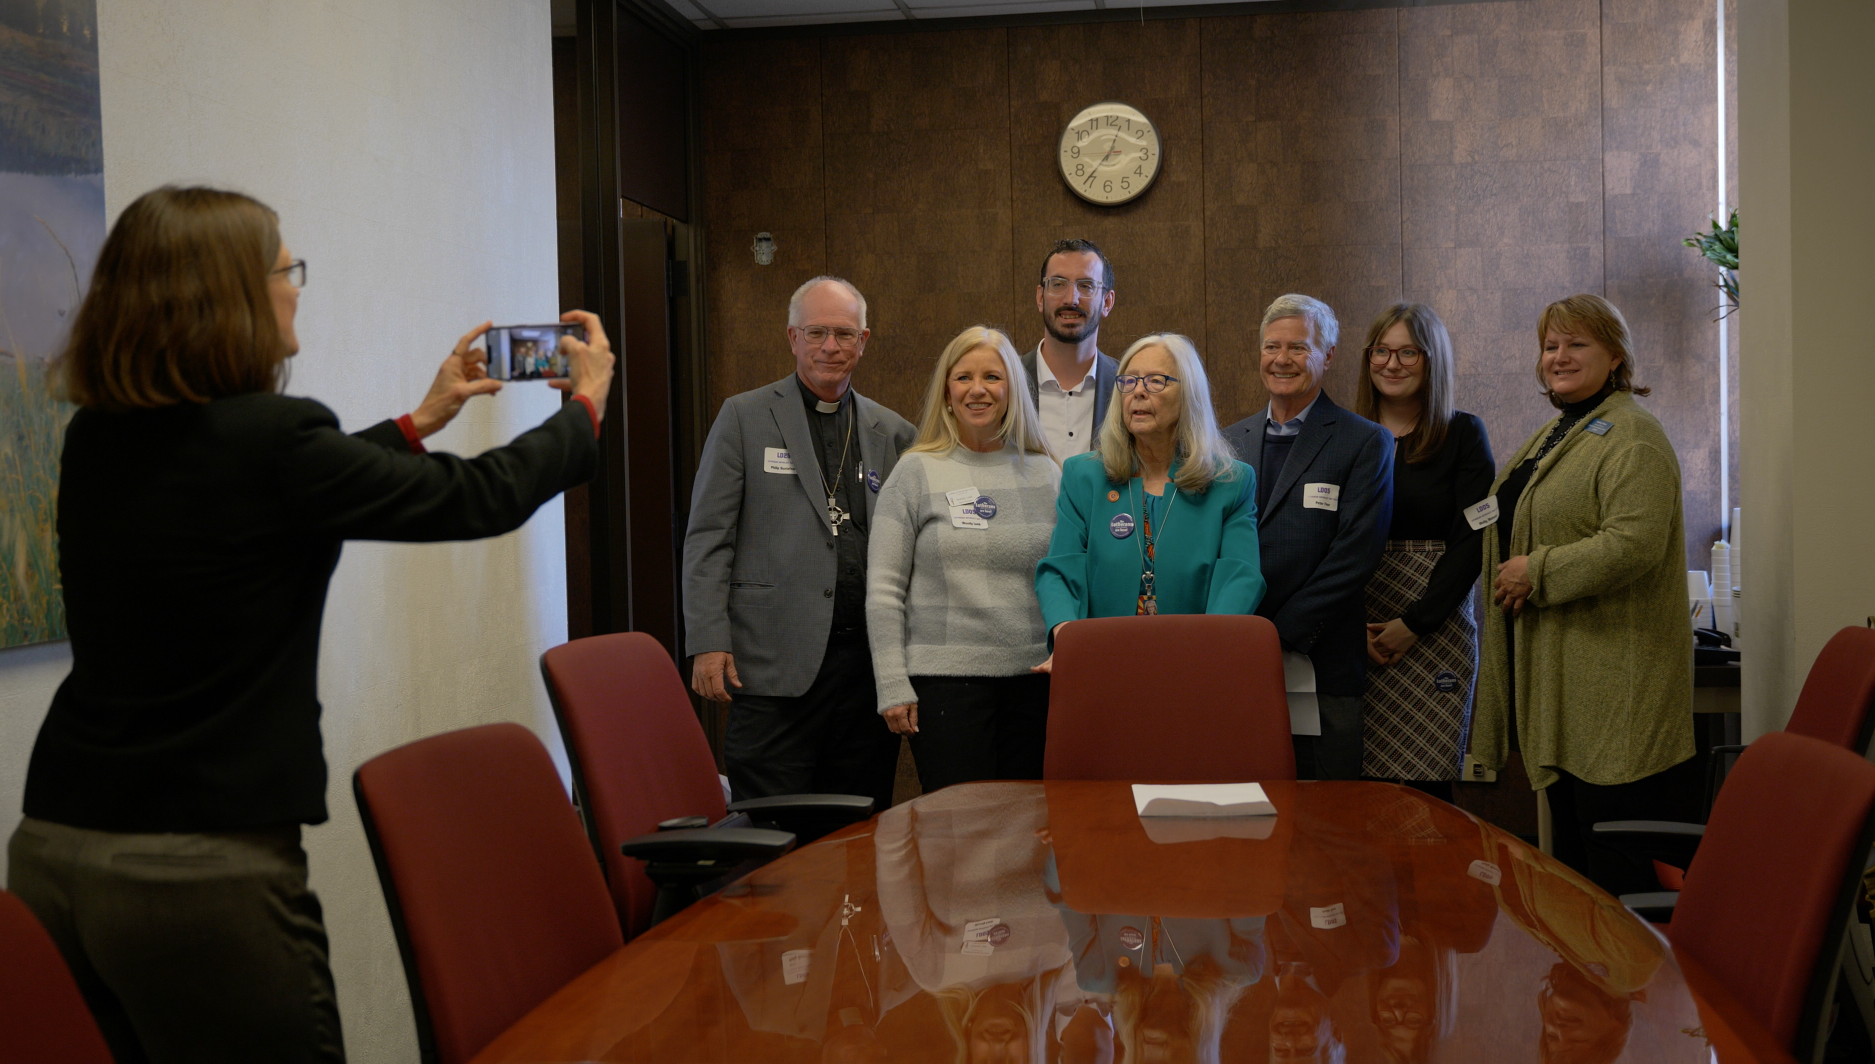  “Always take a picture for social media!” Connie Phillips says, while demonstrating the technique. Left to right: Connie Phillips, Pr. Phil Gustafson (Grace, Phoenix), Wendy Look (LSS-SW board member), Braden Biggs, Sen. Alston, Peter Faur (La Casa 